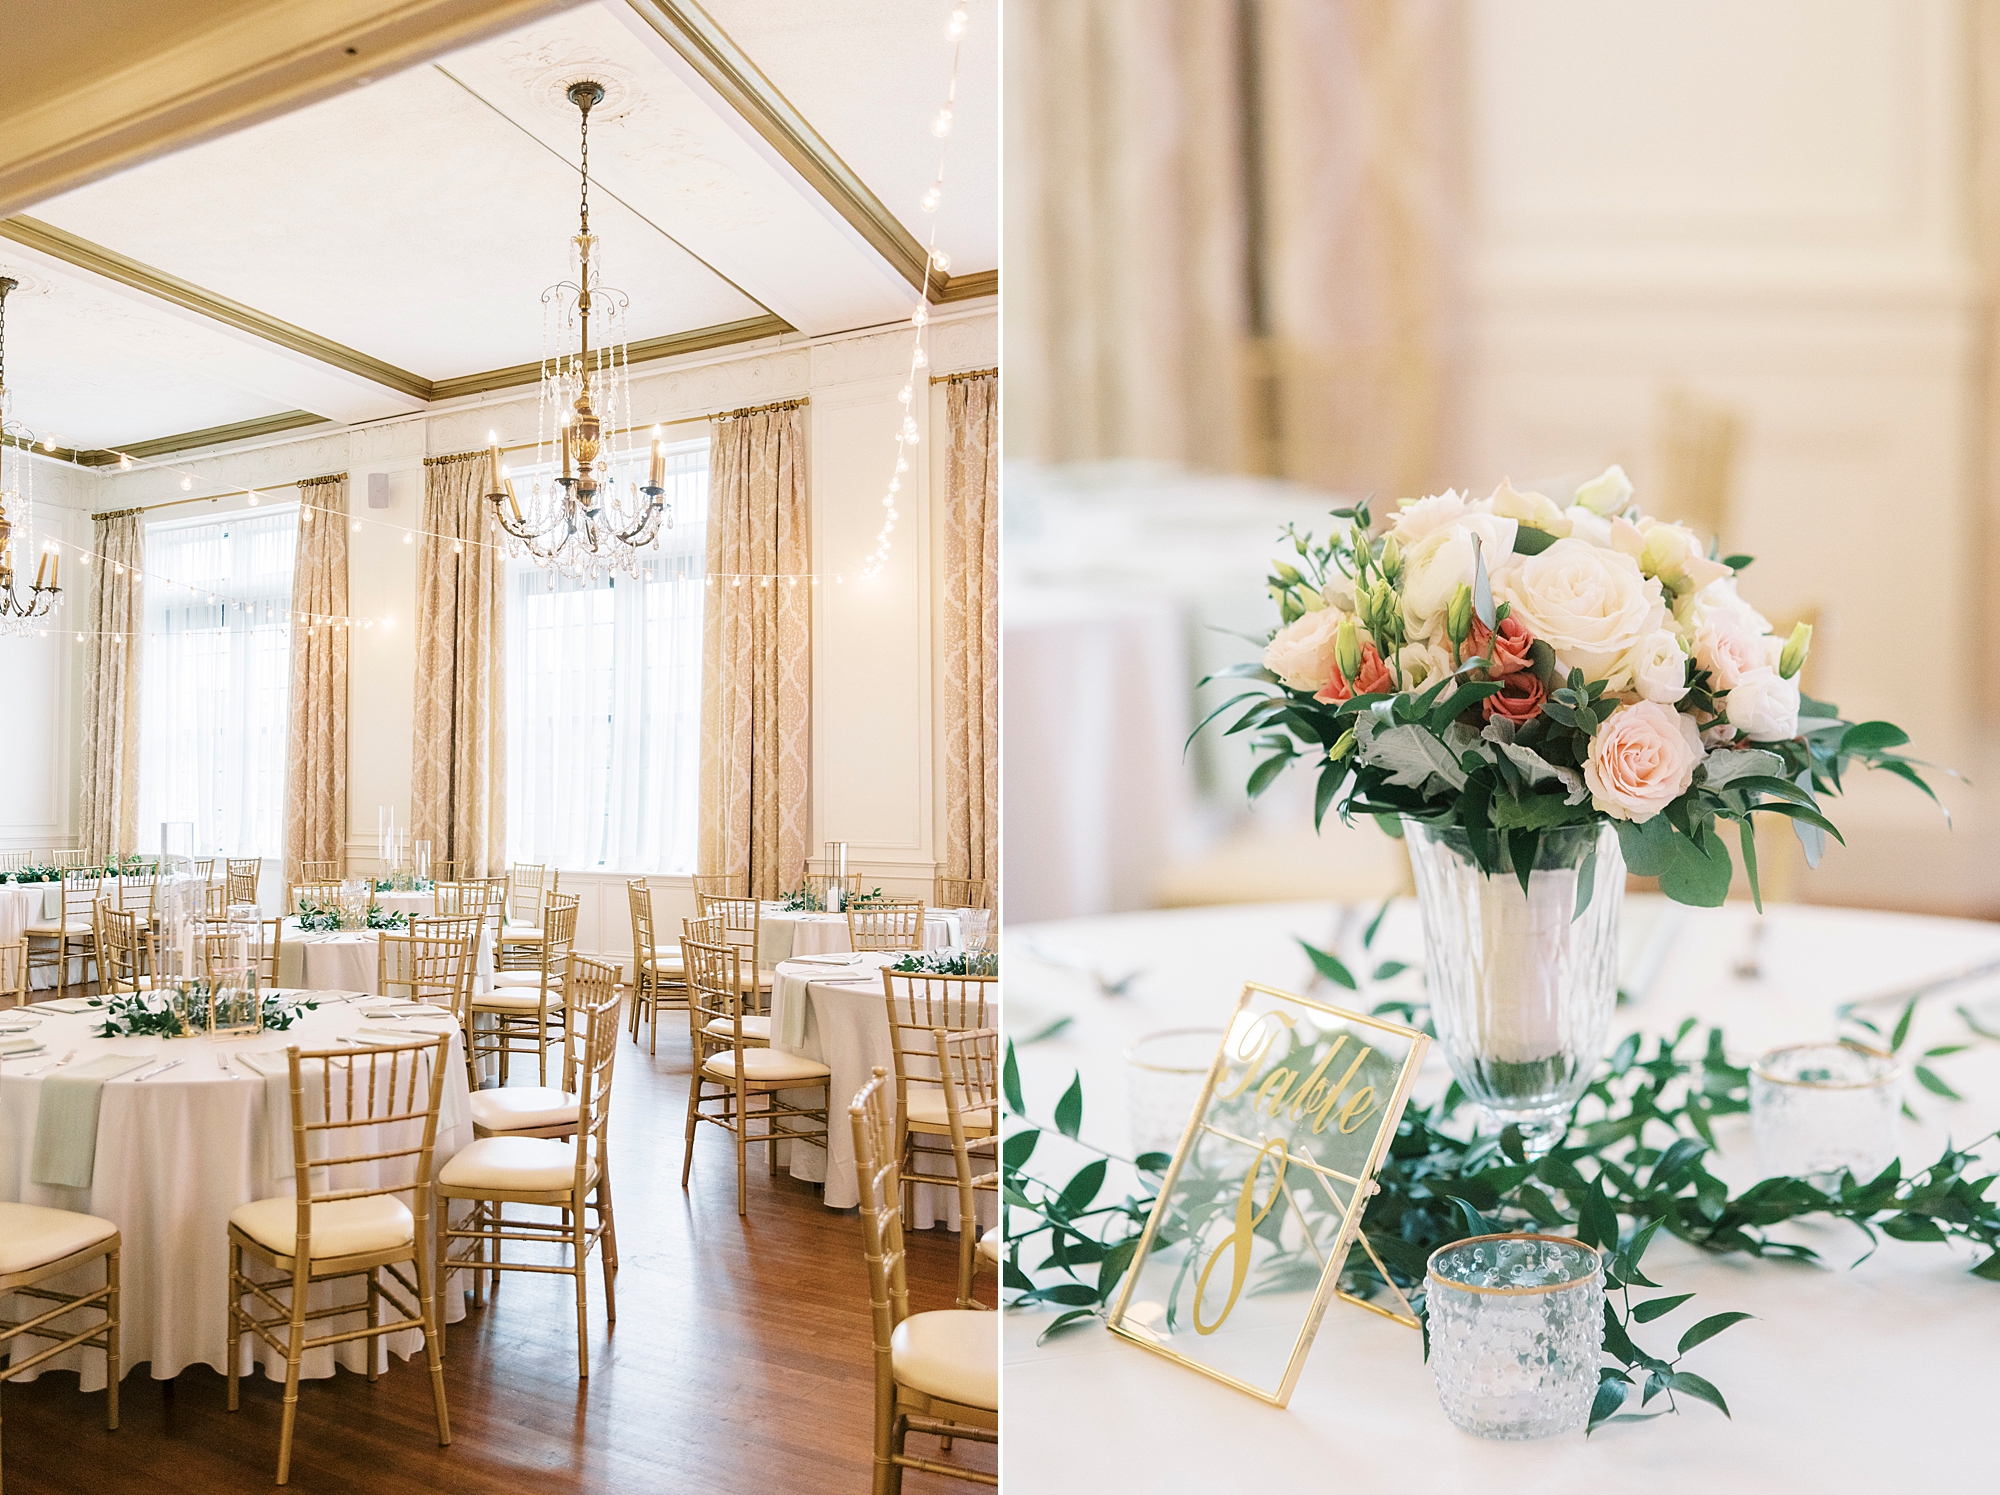 Hotel Concord wedding reception decor with gold and green details 